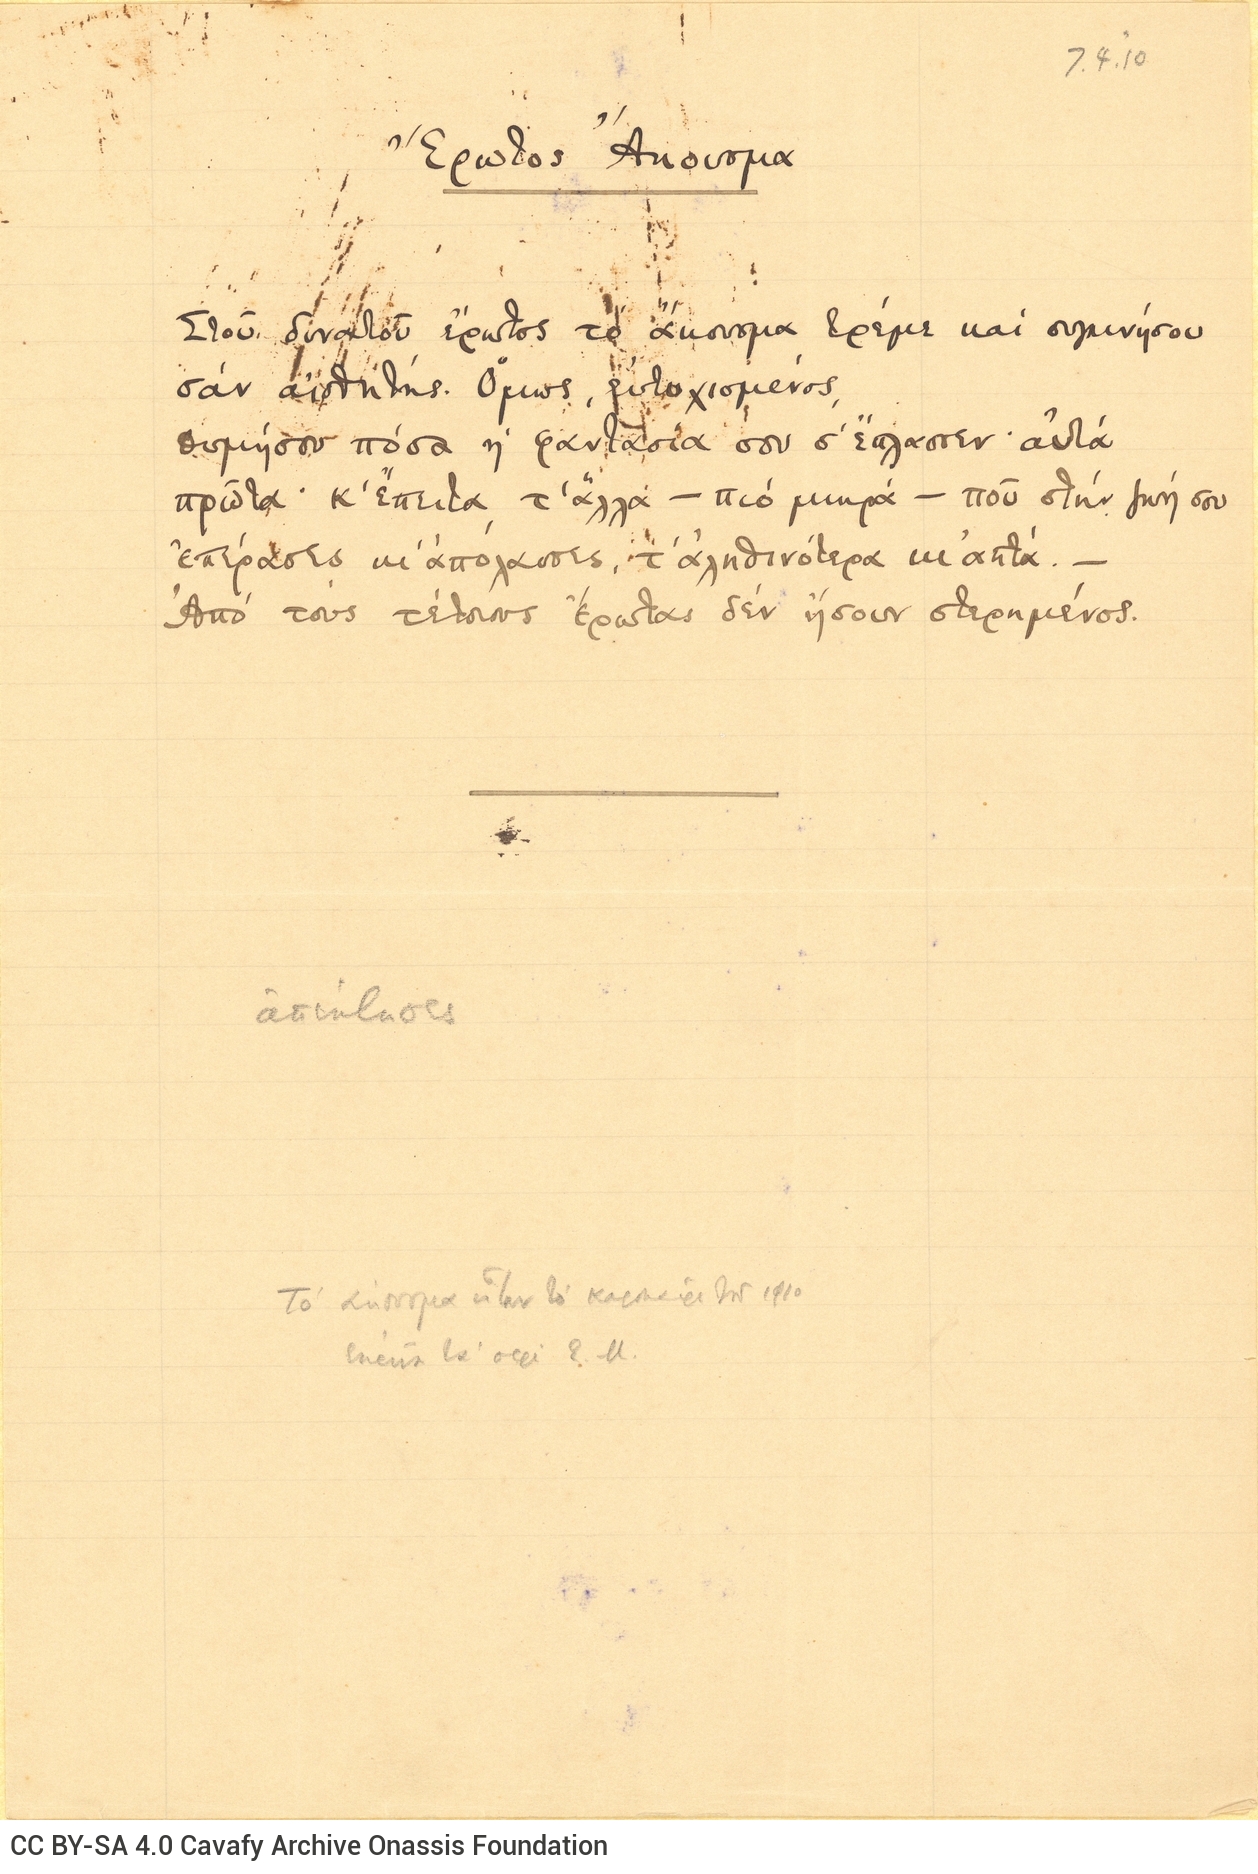 Manuscript of the poem "Hearing of Love" and notes in the margin. Date indications: "[...] summer of 1910 [...]" and "7.4.